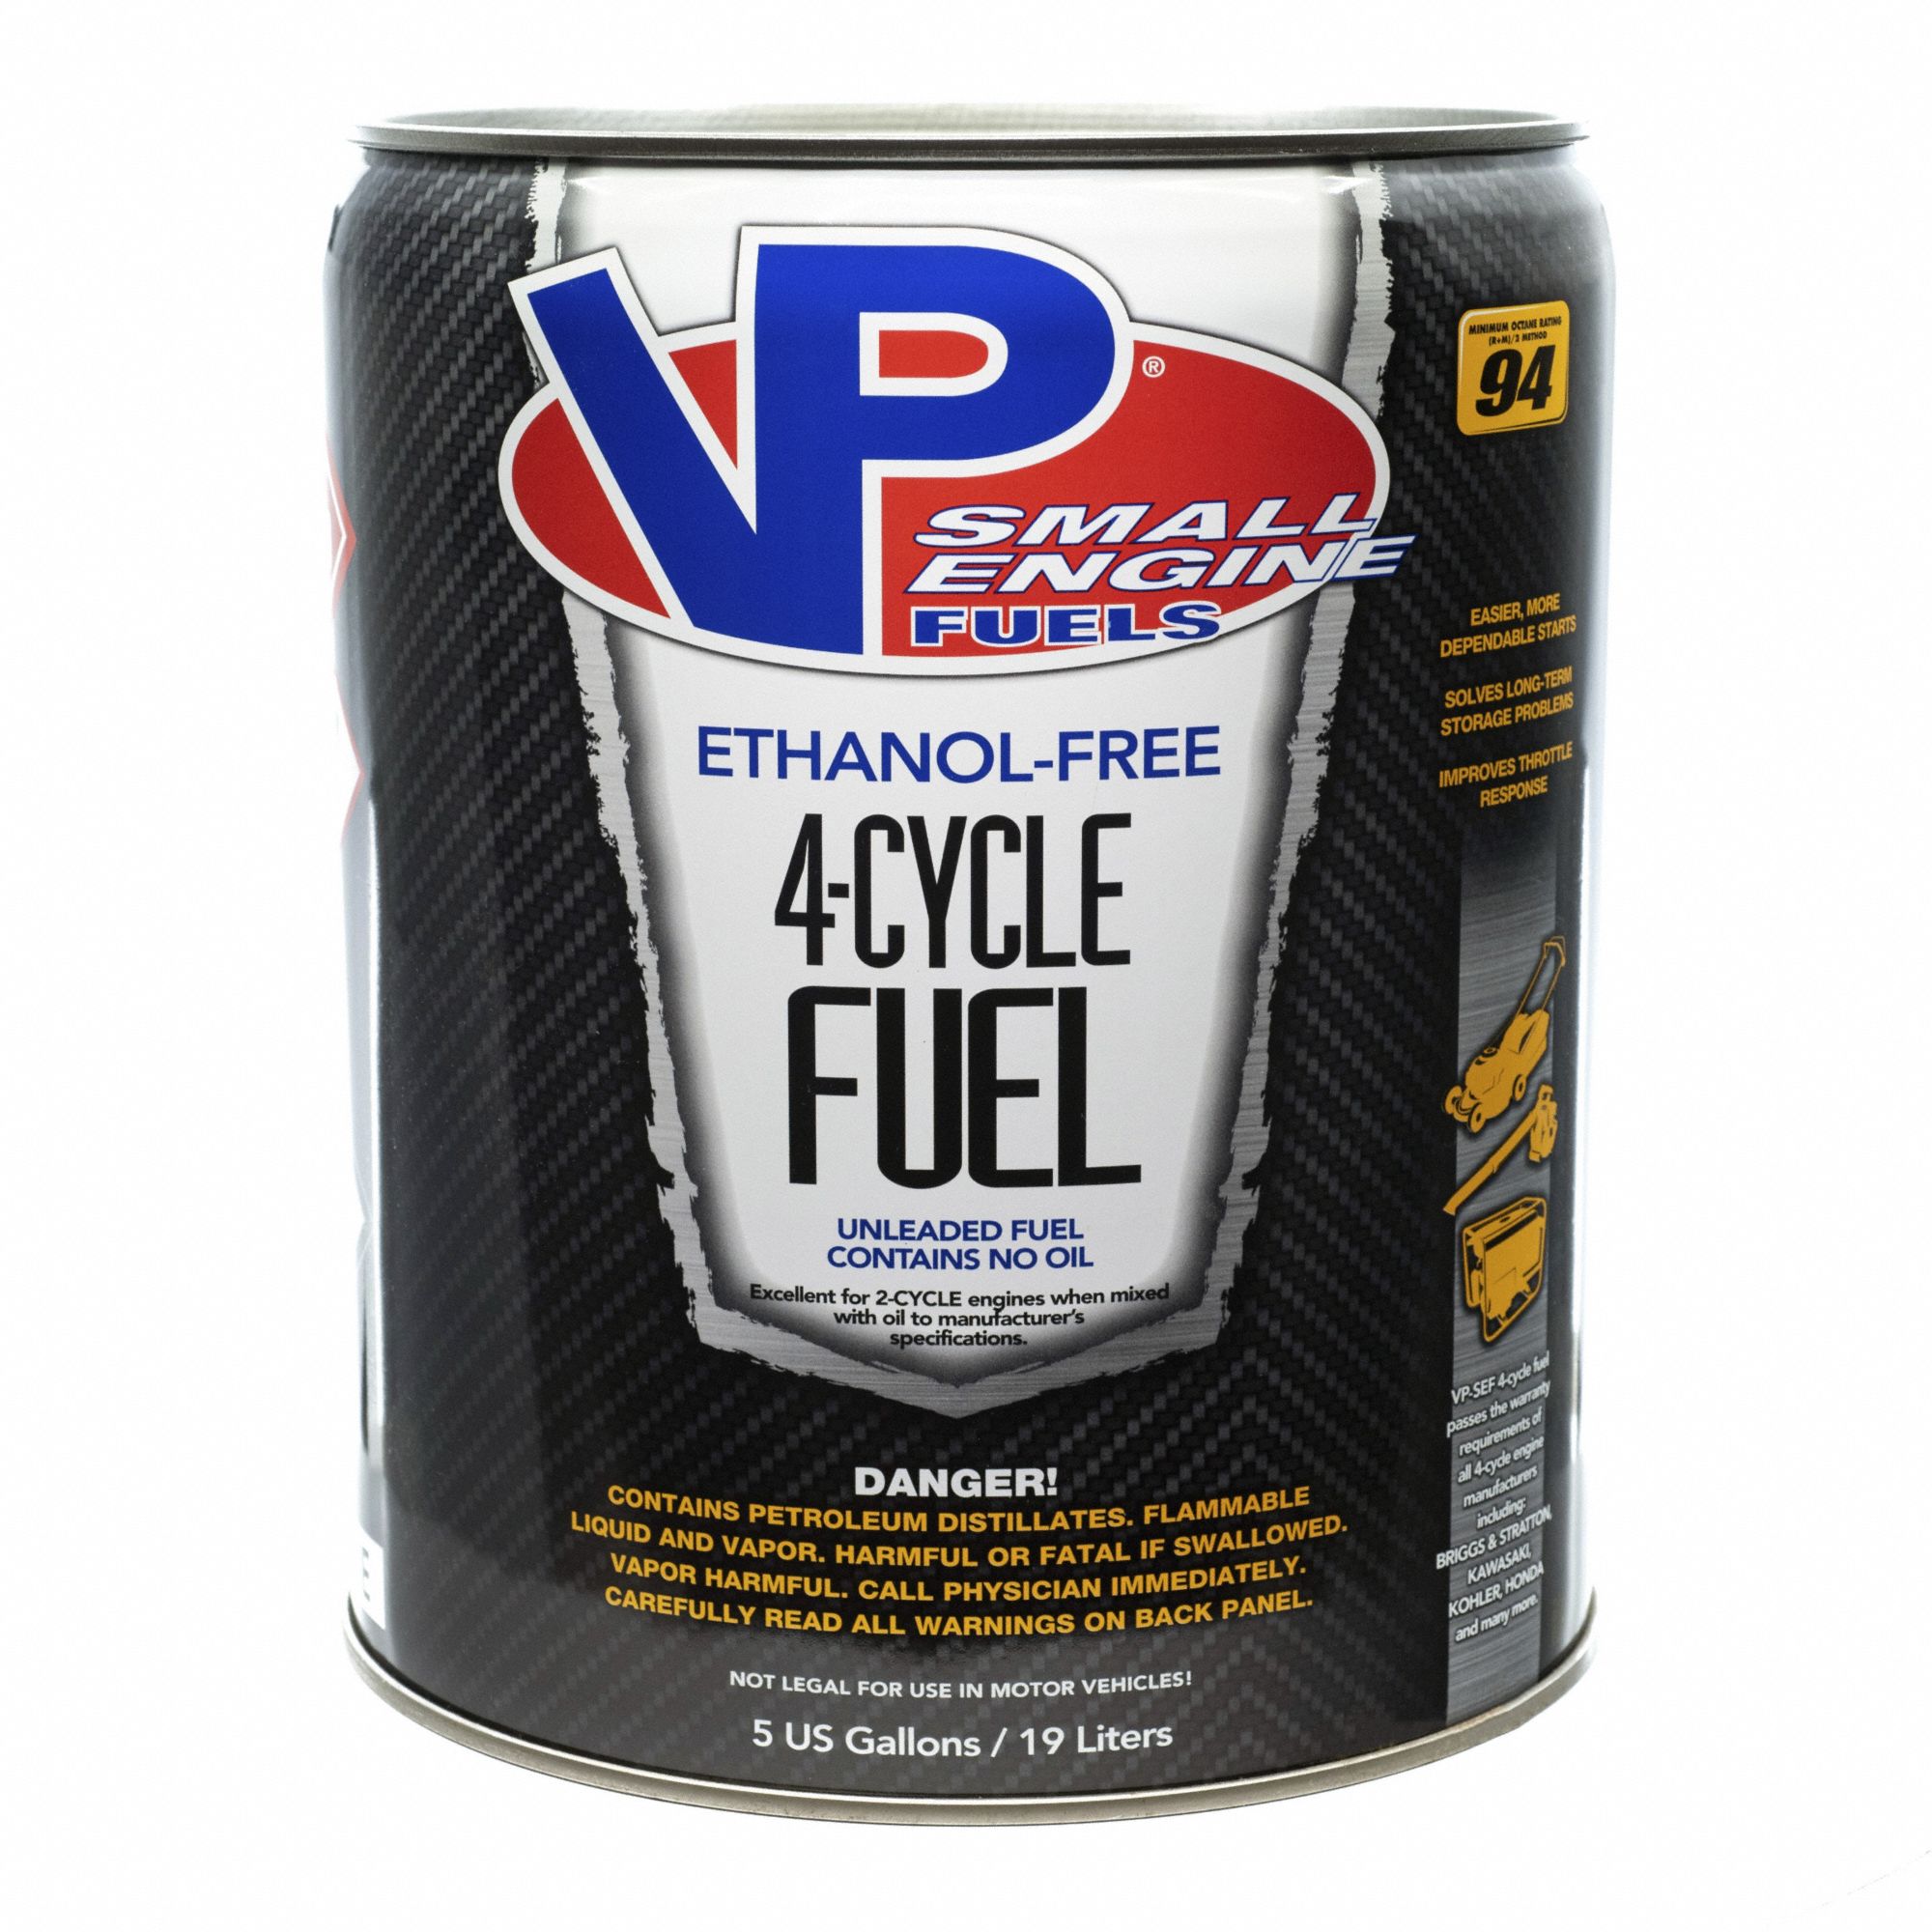 Small Engine Fuel, 4 Cycle: Ready to Use, 5 gal Container Size, Pail, 4-Cycle